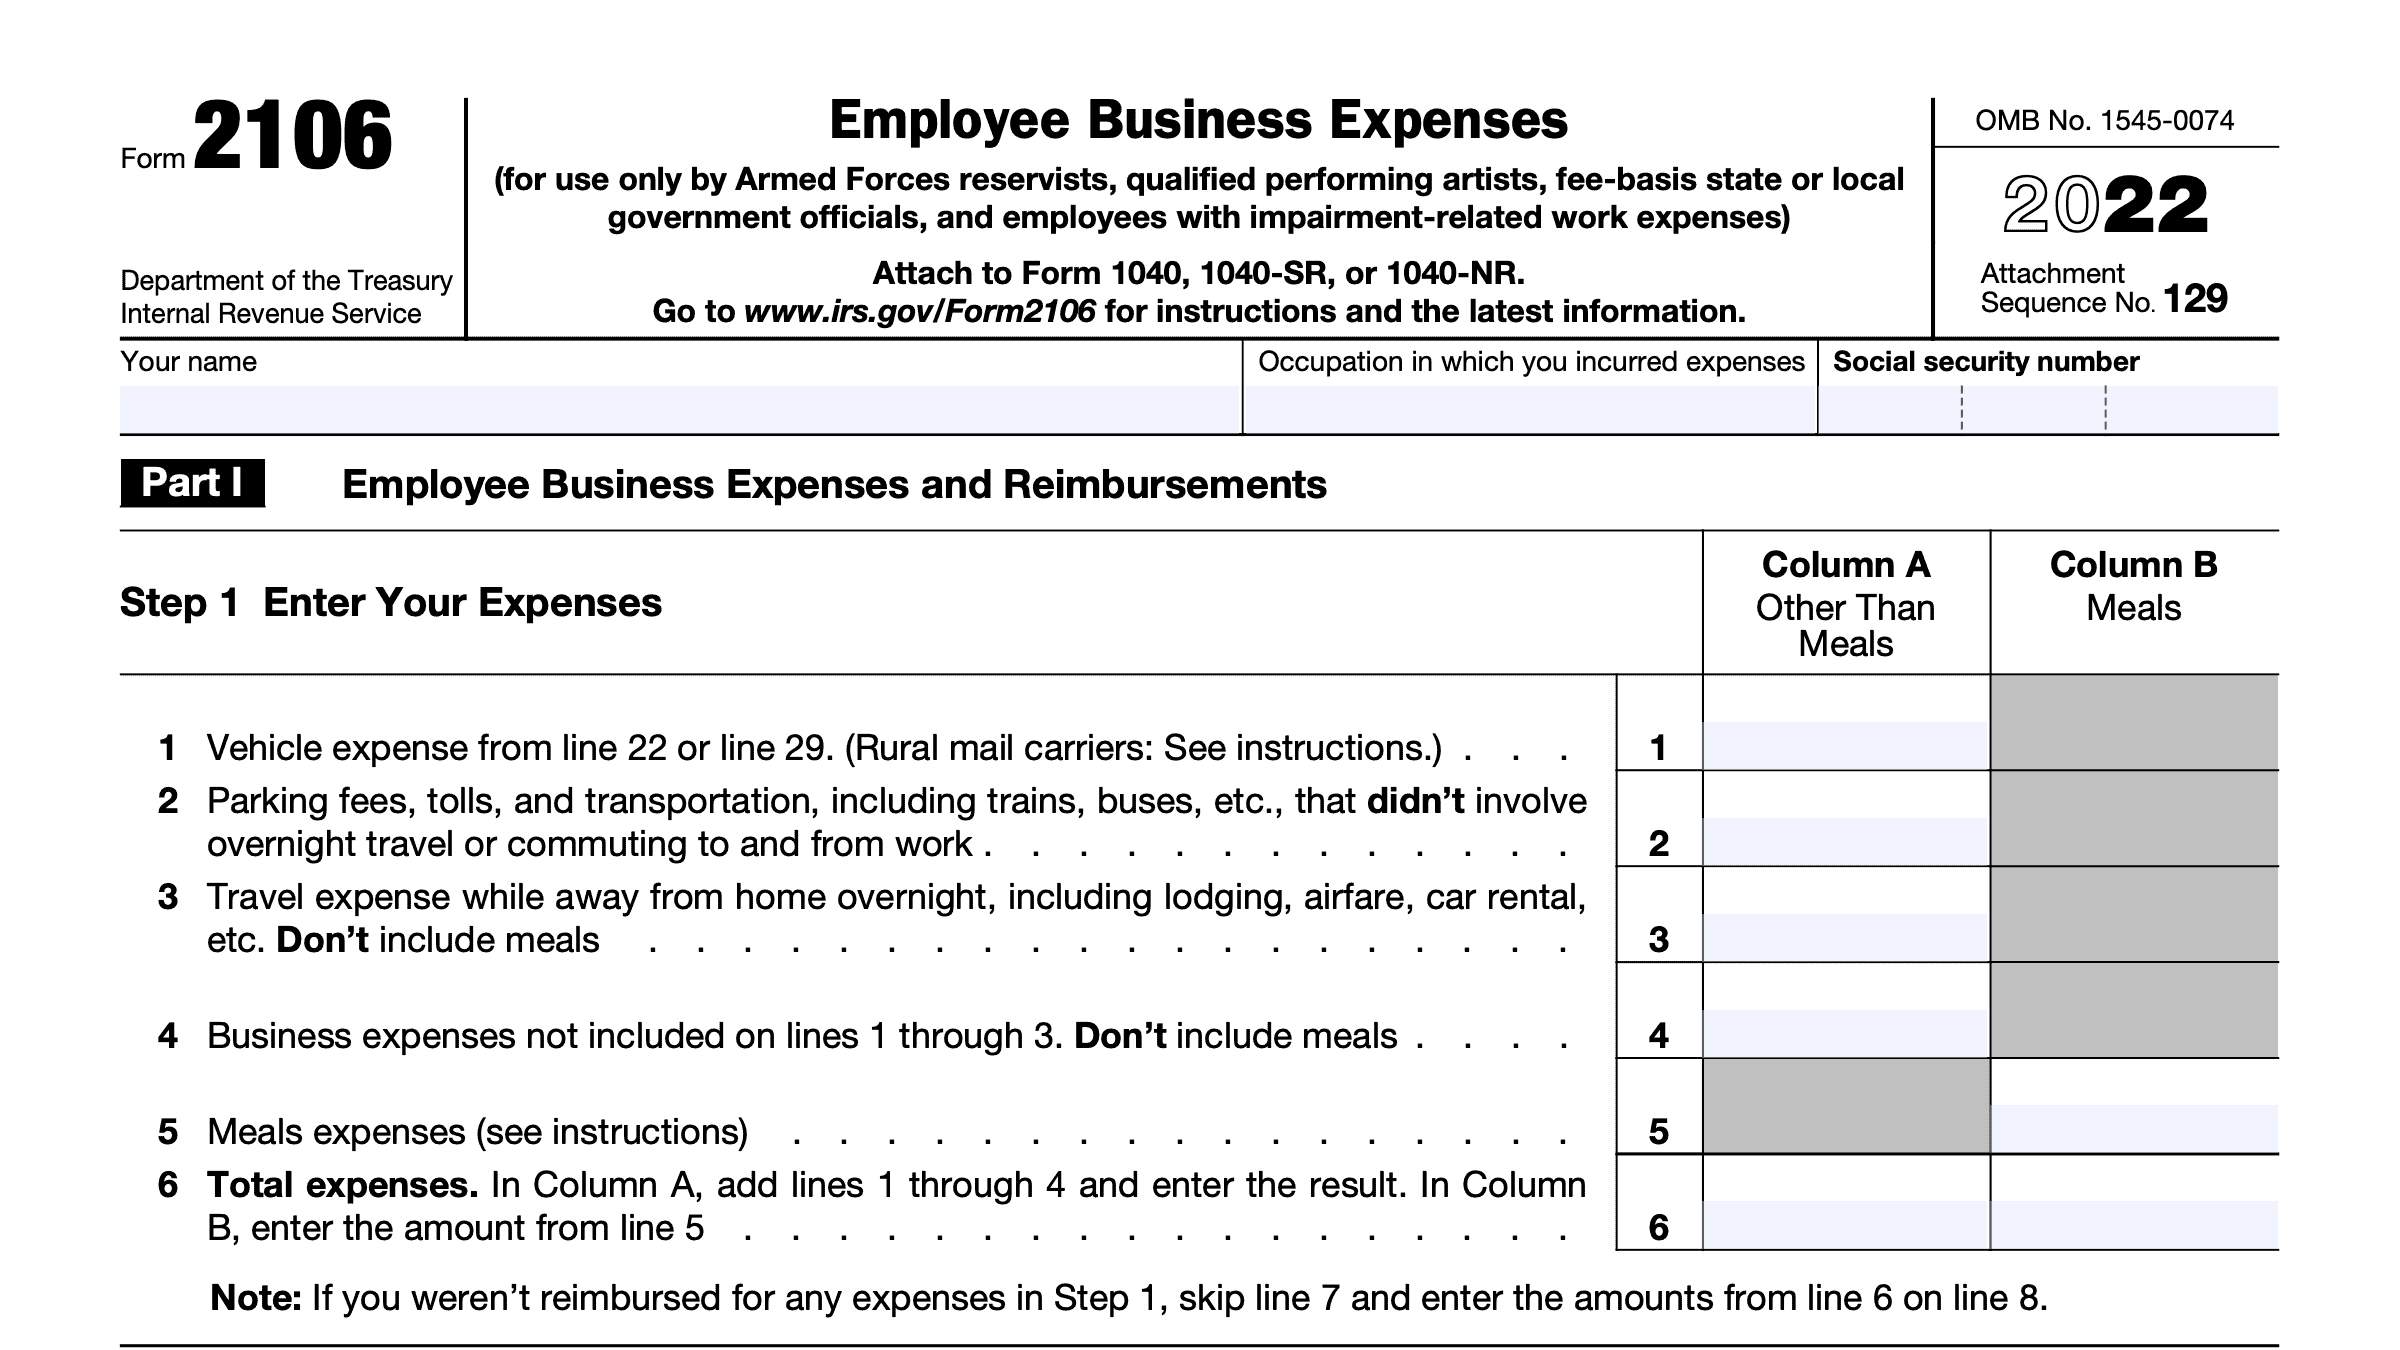 IRS Form 2106 A Guide to Employee Business Expenses